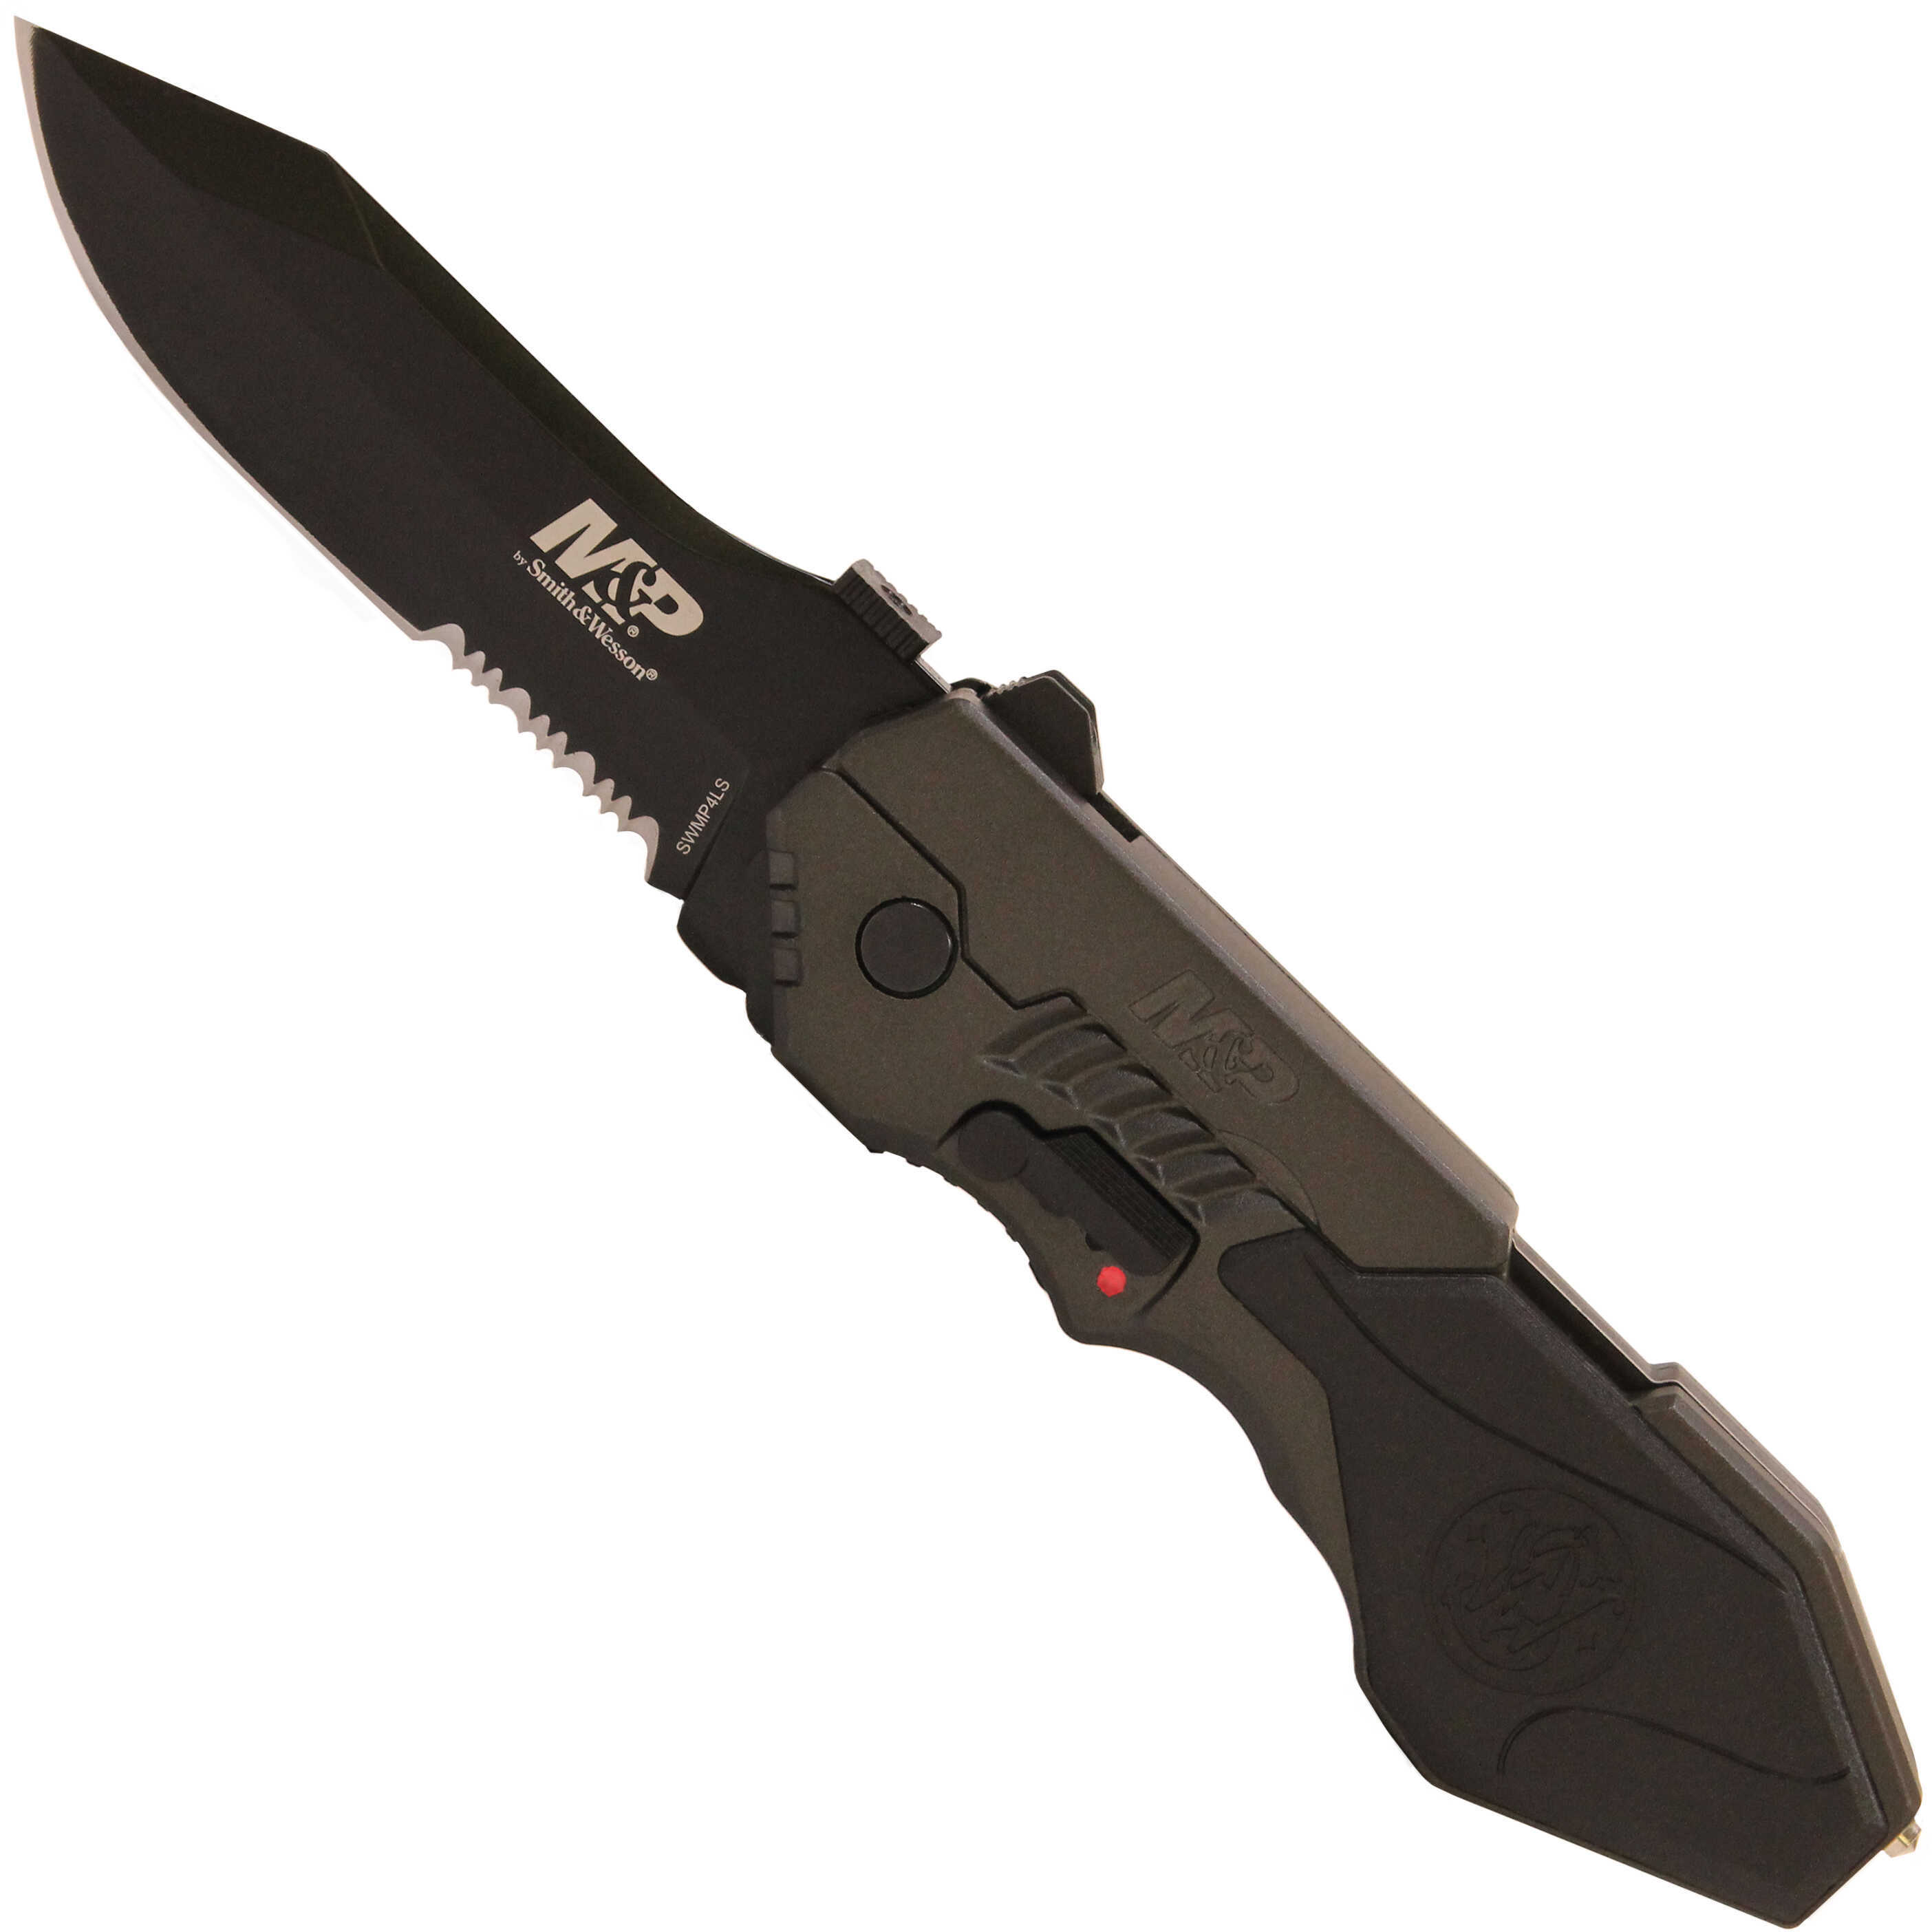 Smith & Wesson S&W Knife M&P 2Nd Gen Spring Assist 3.6" Drop PNT Serrated